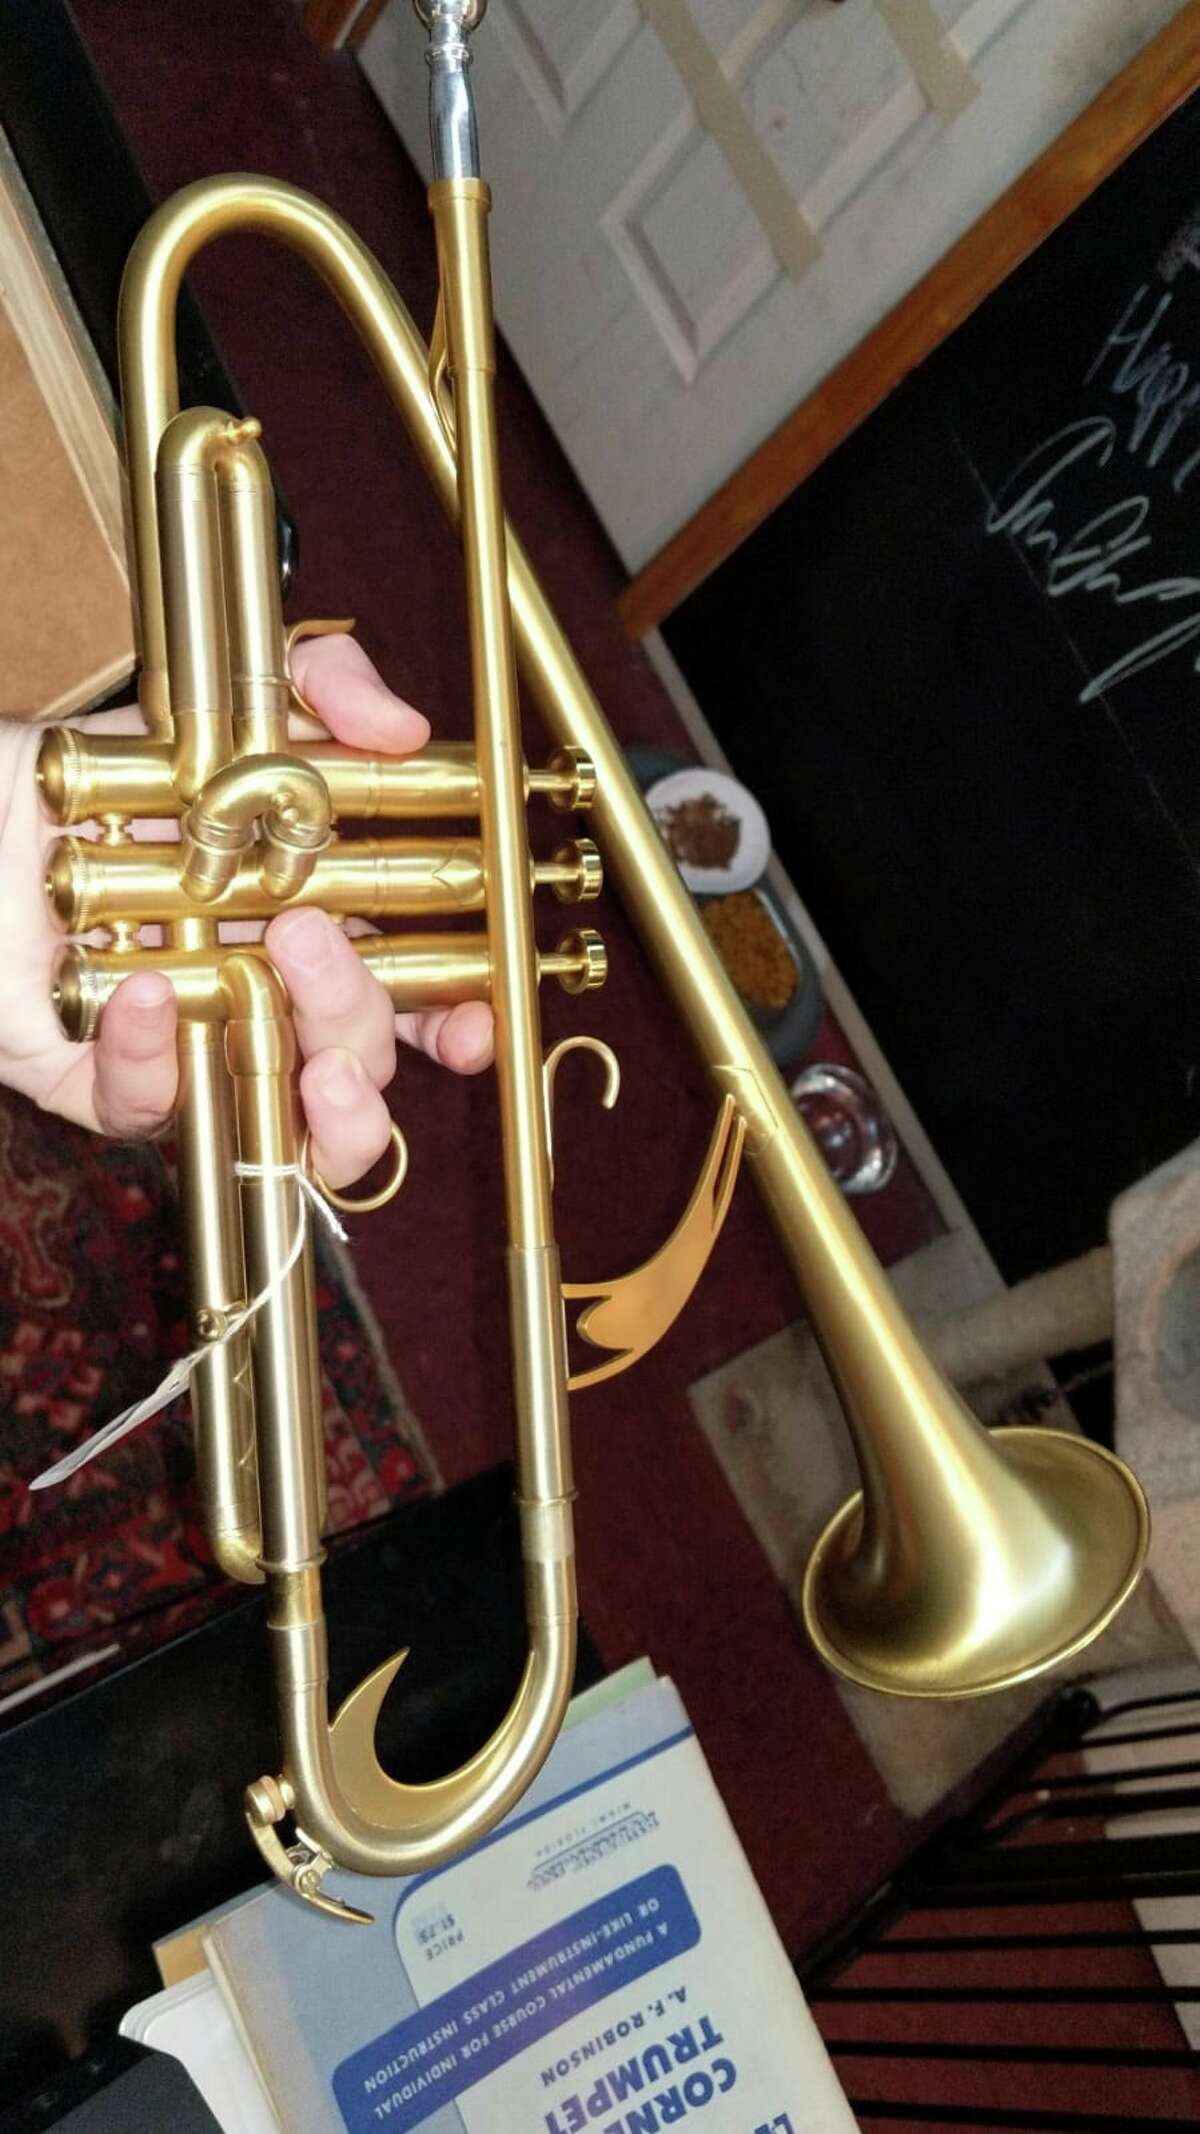 Dave Levy, a New York-based musician, had his trumpet stolen while visiting San Francisco jazz club the Black Cat last week. Pictured: Levy's custom trumpet.